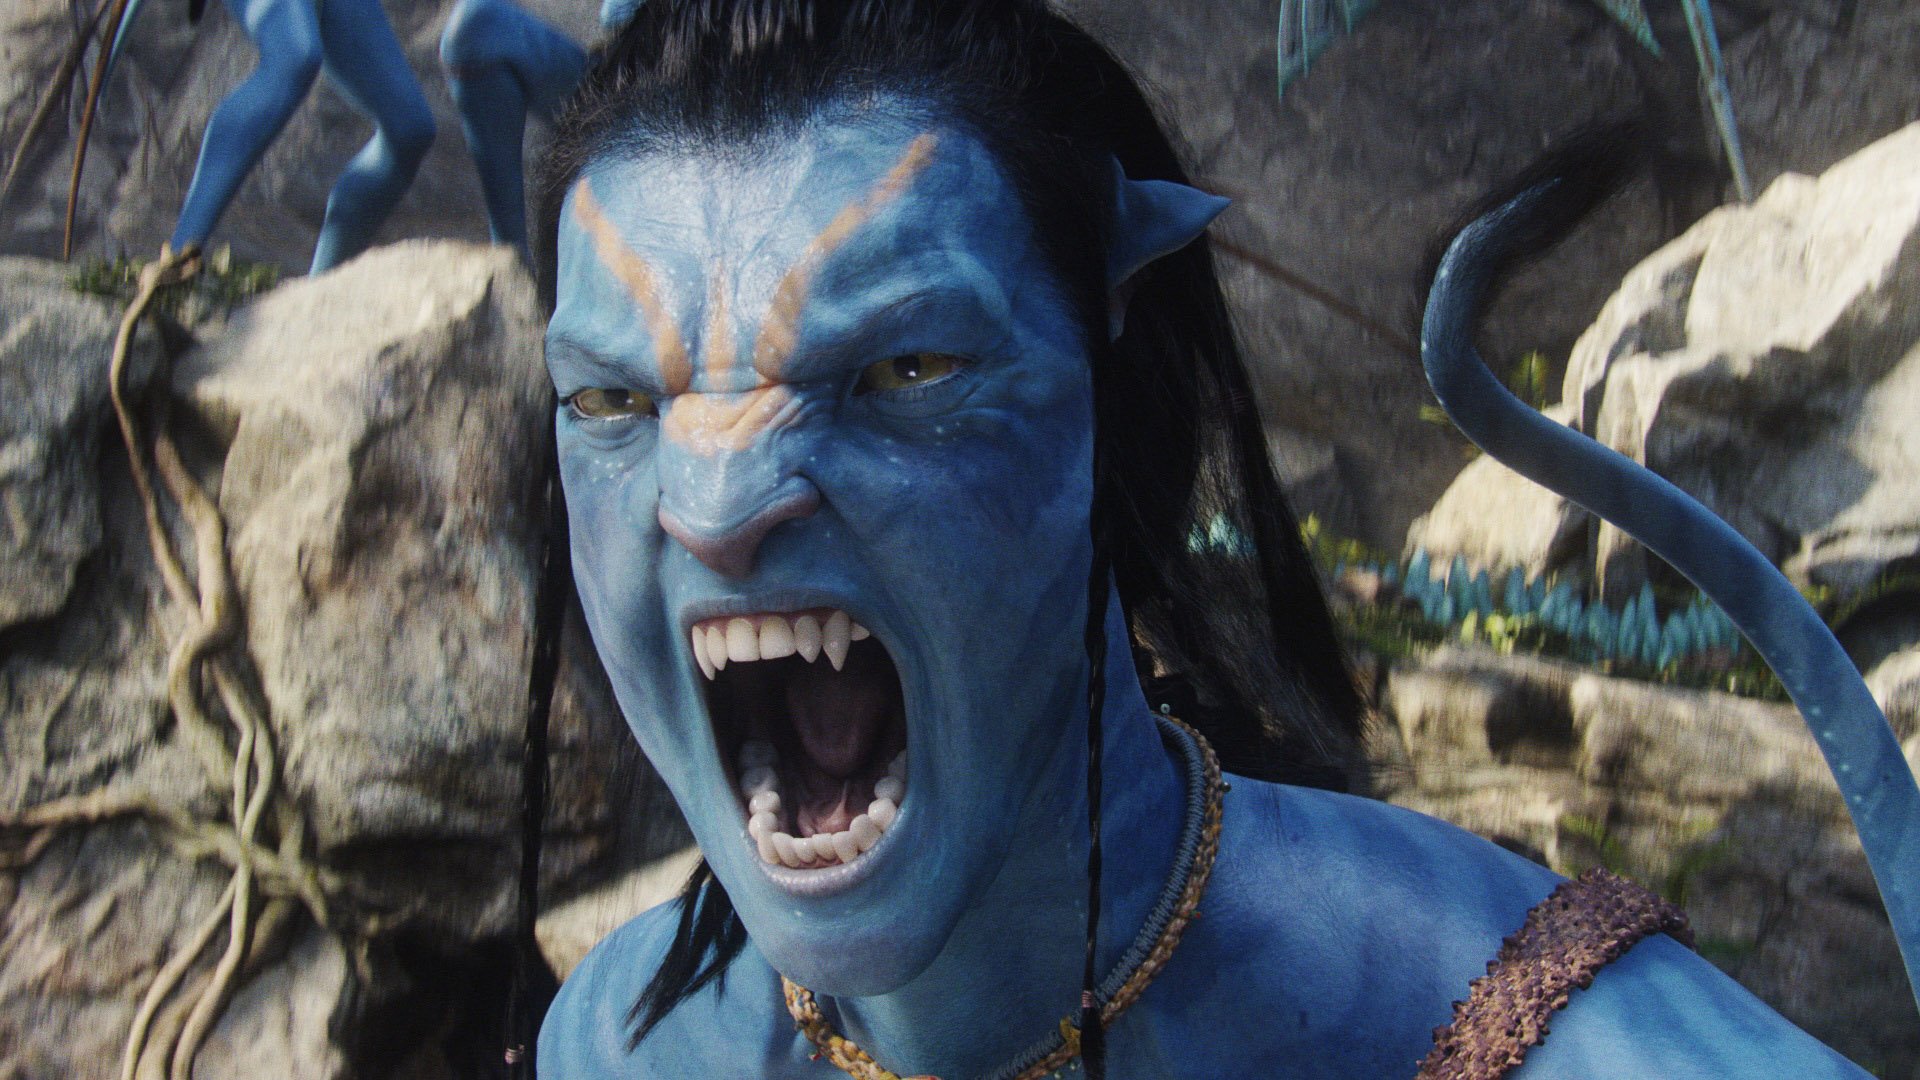 Fandango on Twitter: "The next four #Avatar movies will have unique